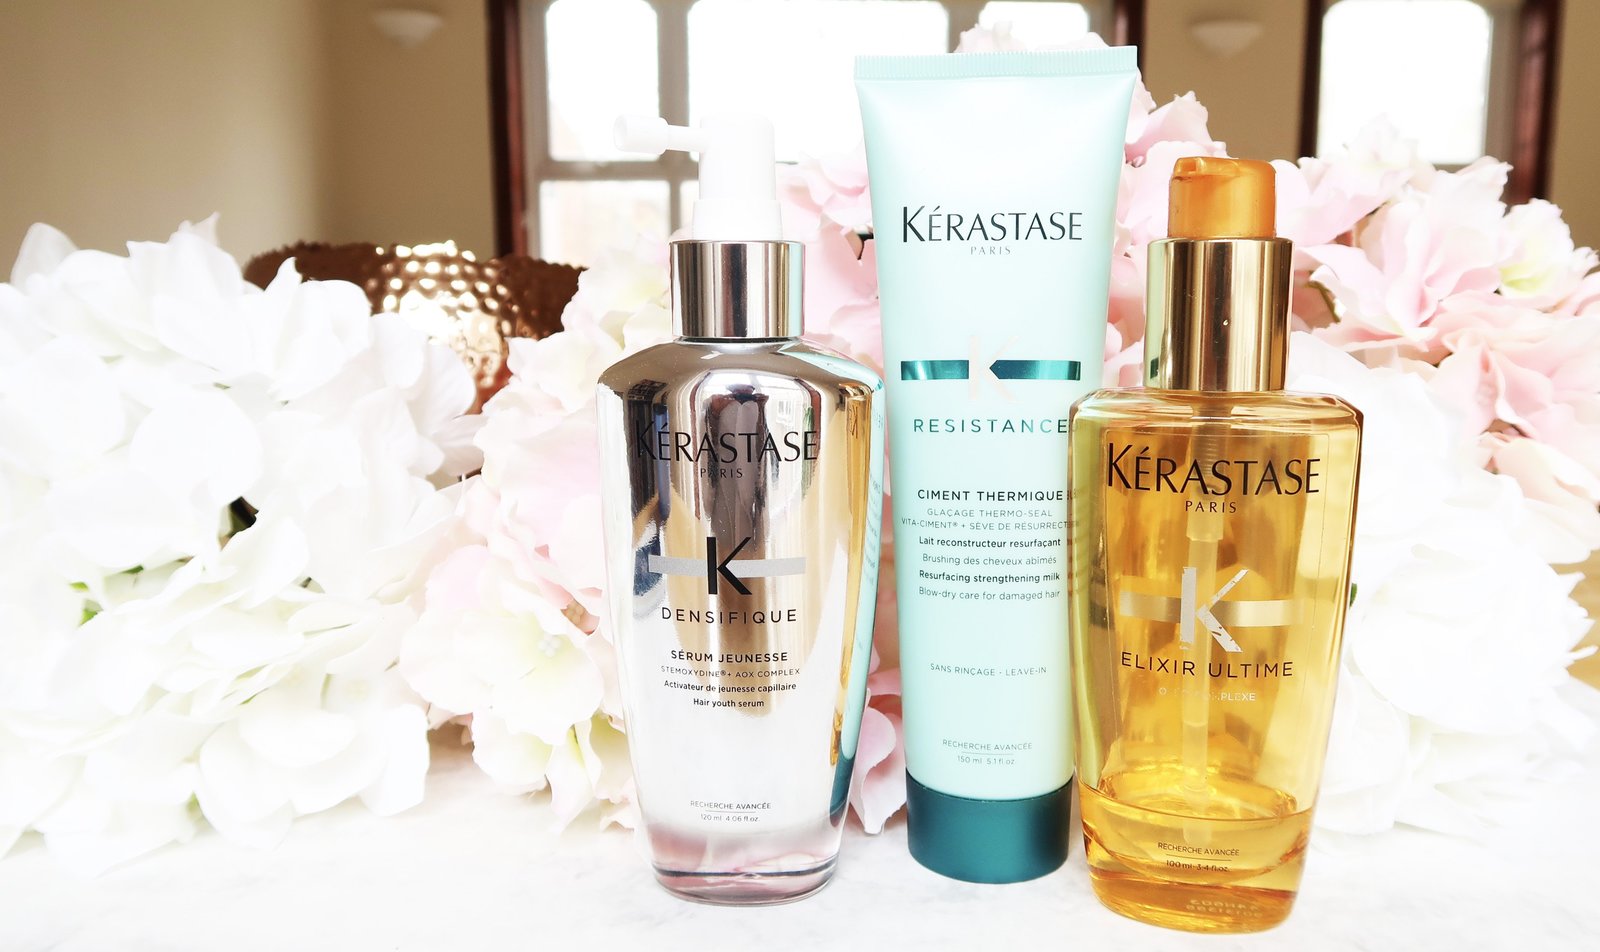 Close up of Kerastase products